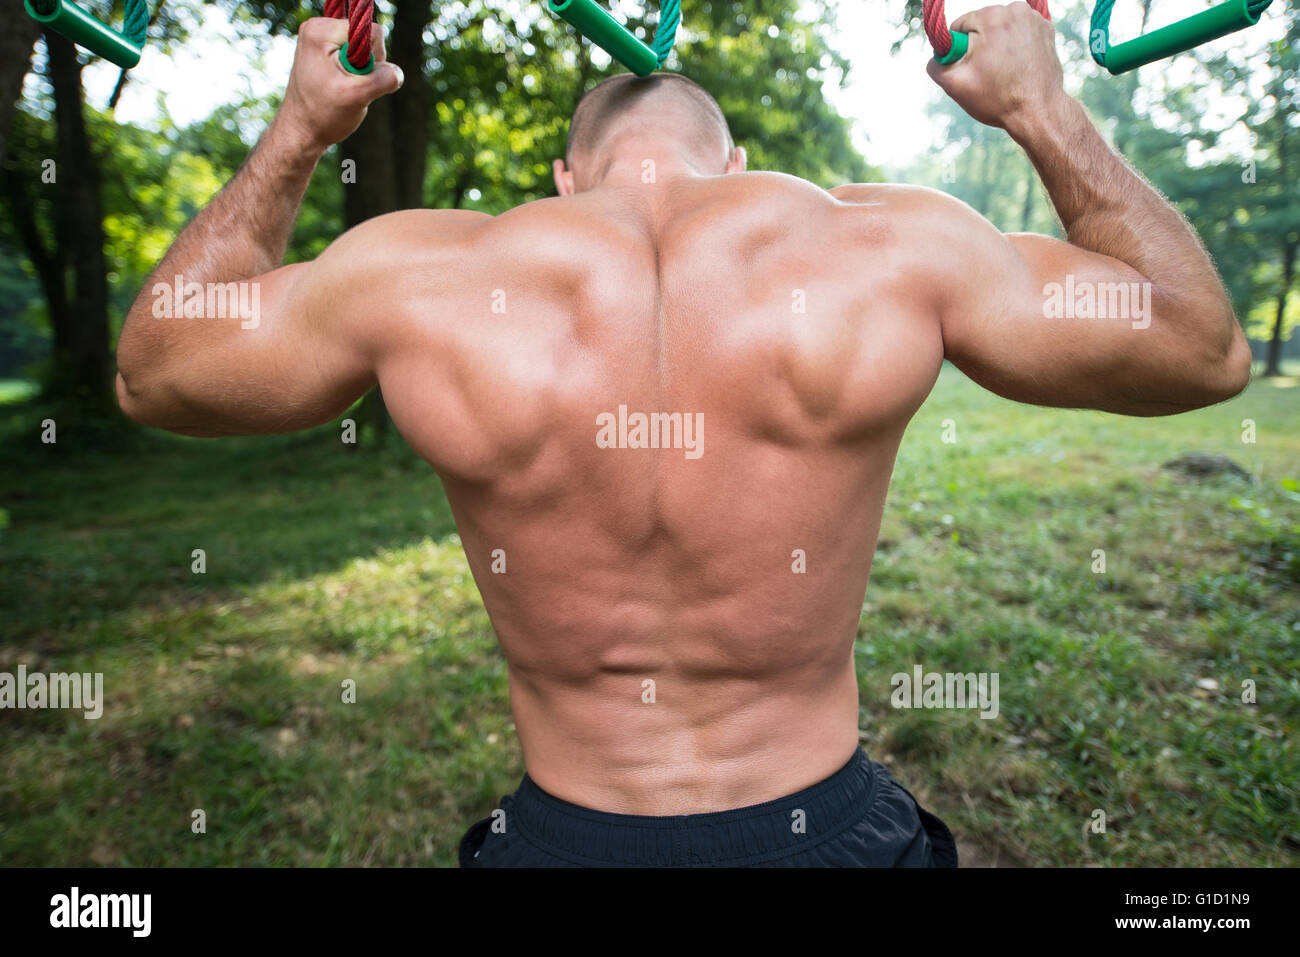 Close-Up Muscular Built Young Athlete Working Out In An Outdoor Gym - Doing Chin-Ups Stock Photo